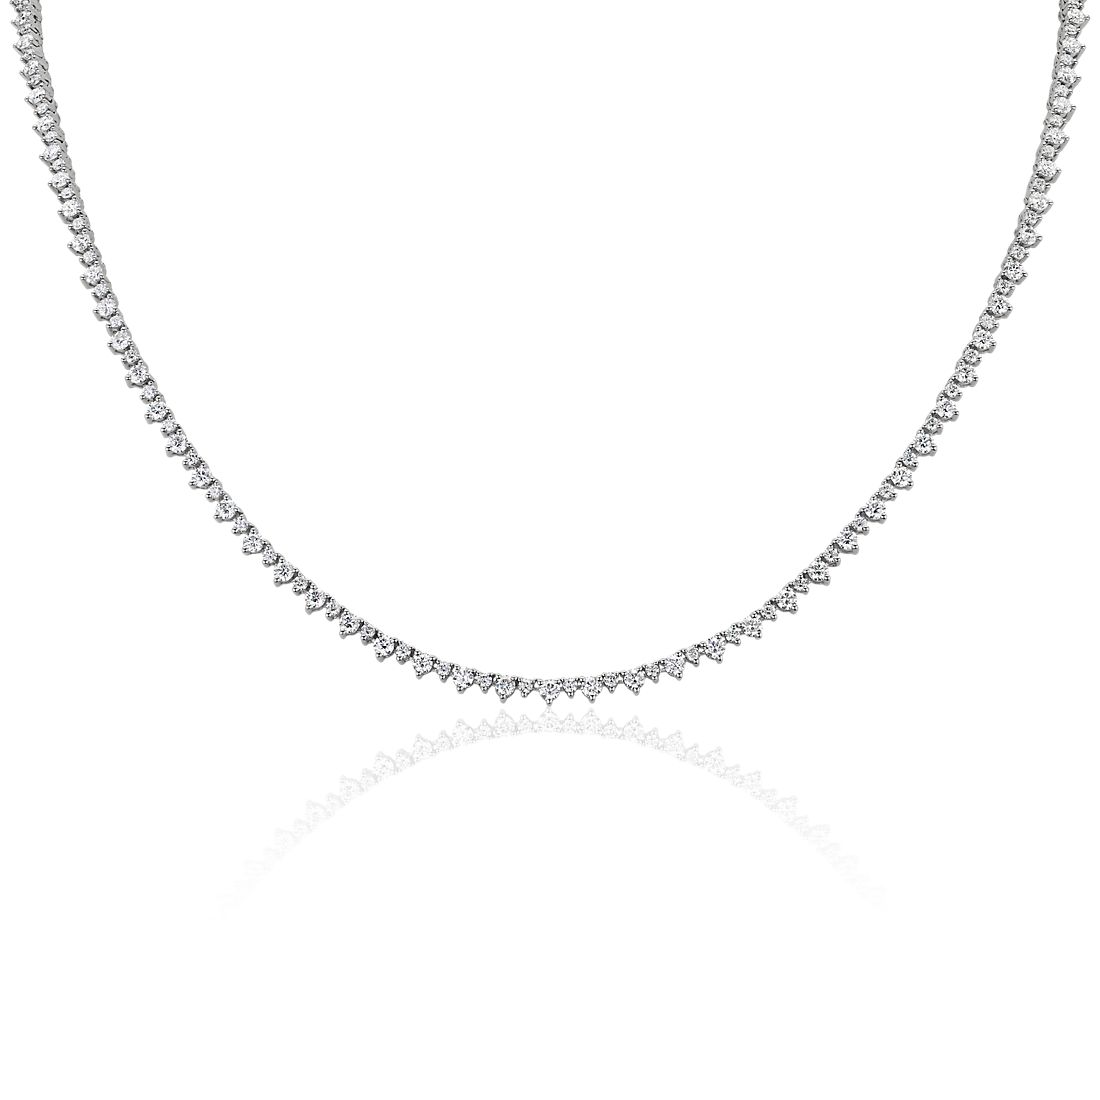 Alternating Size Eternity Necklace in 14k White Gold (5 ct. tw.)